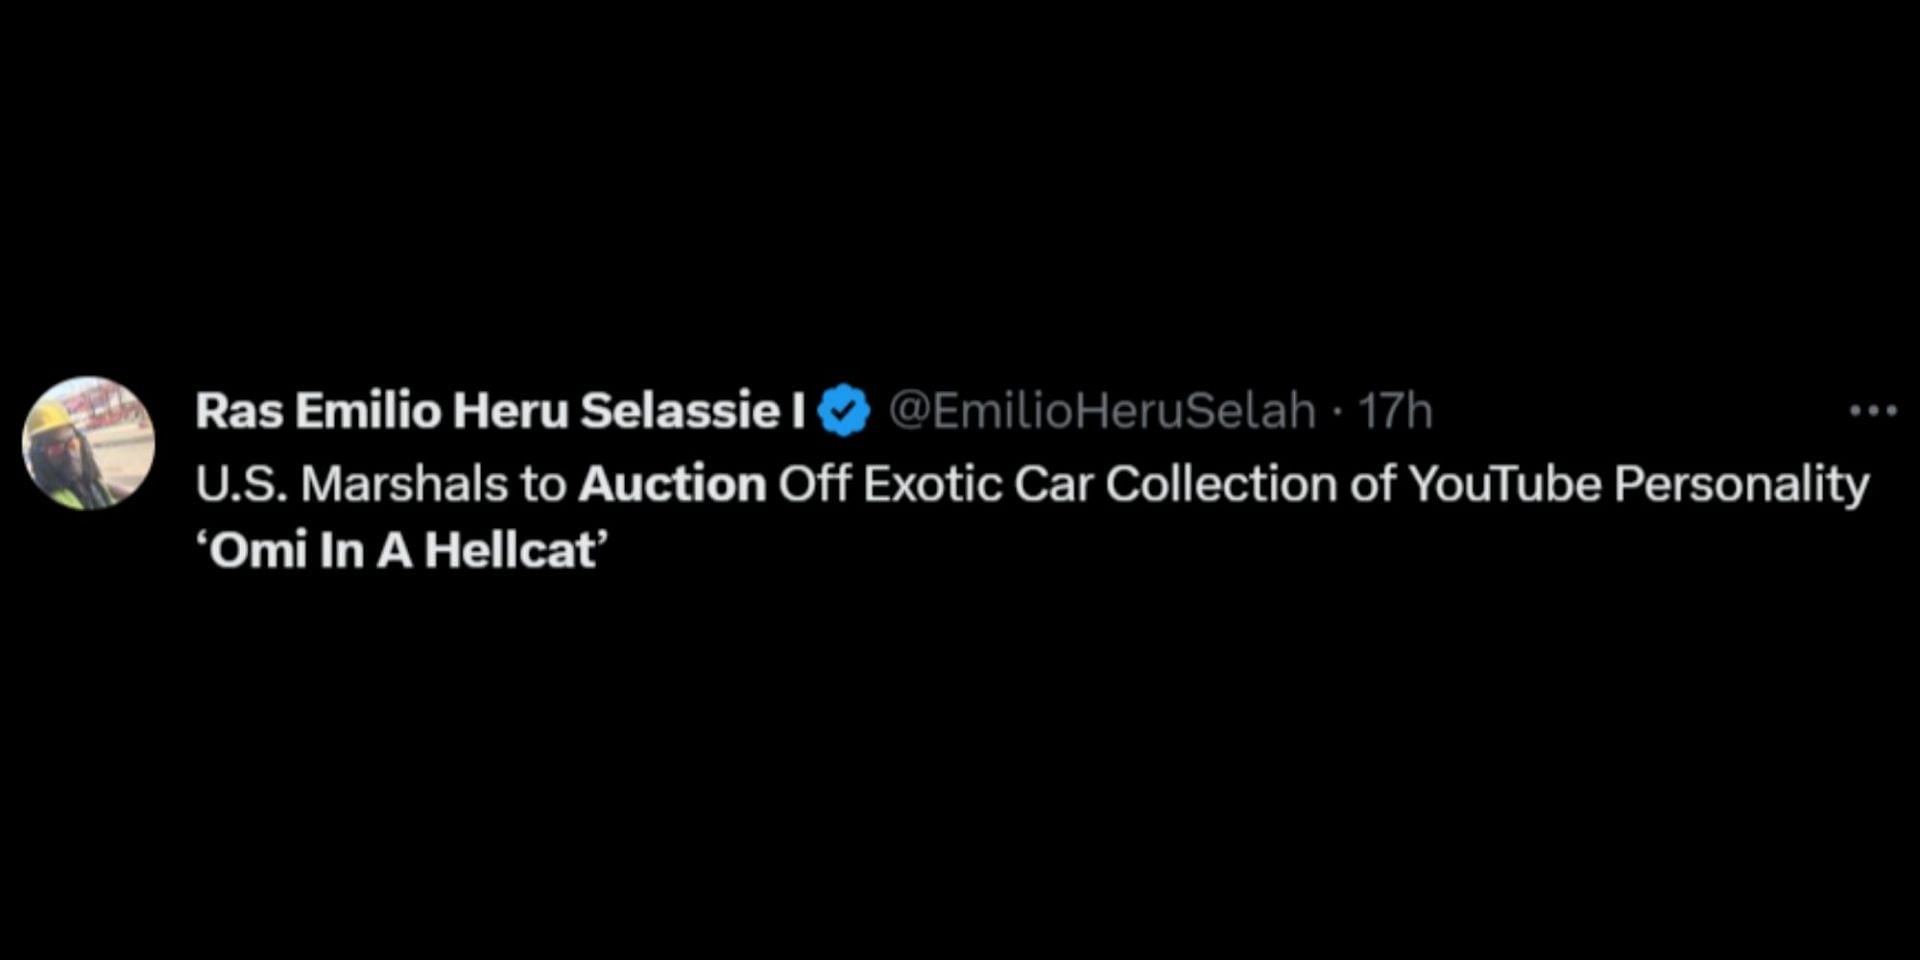 YouTuber Omi in a Hellcat&#039;s car collection is to be auctioned off by the U.S. Marshals. (Image via X/@EmilioHeruSelah)